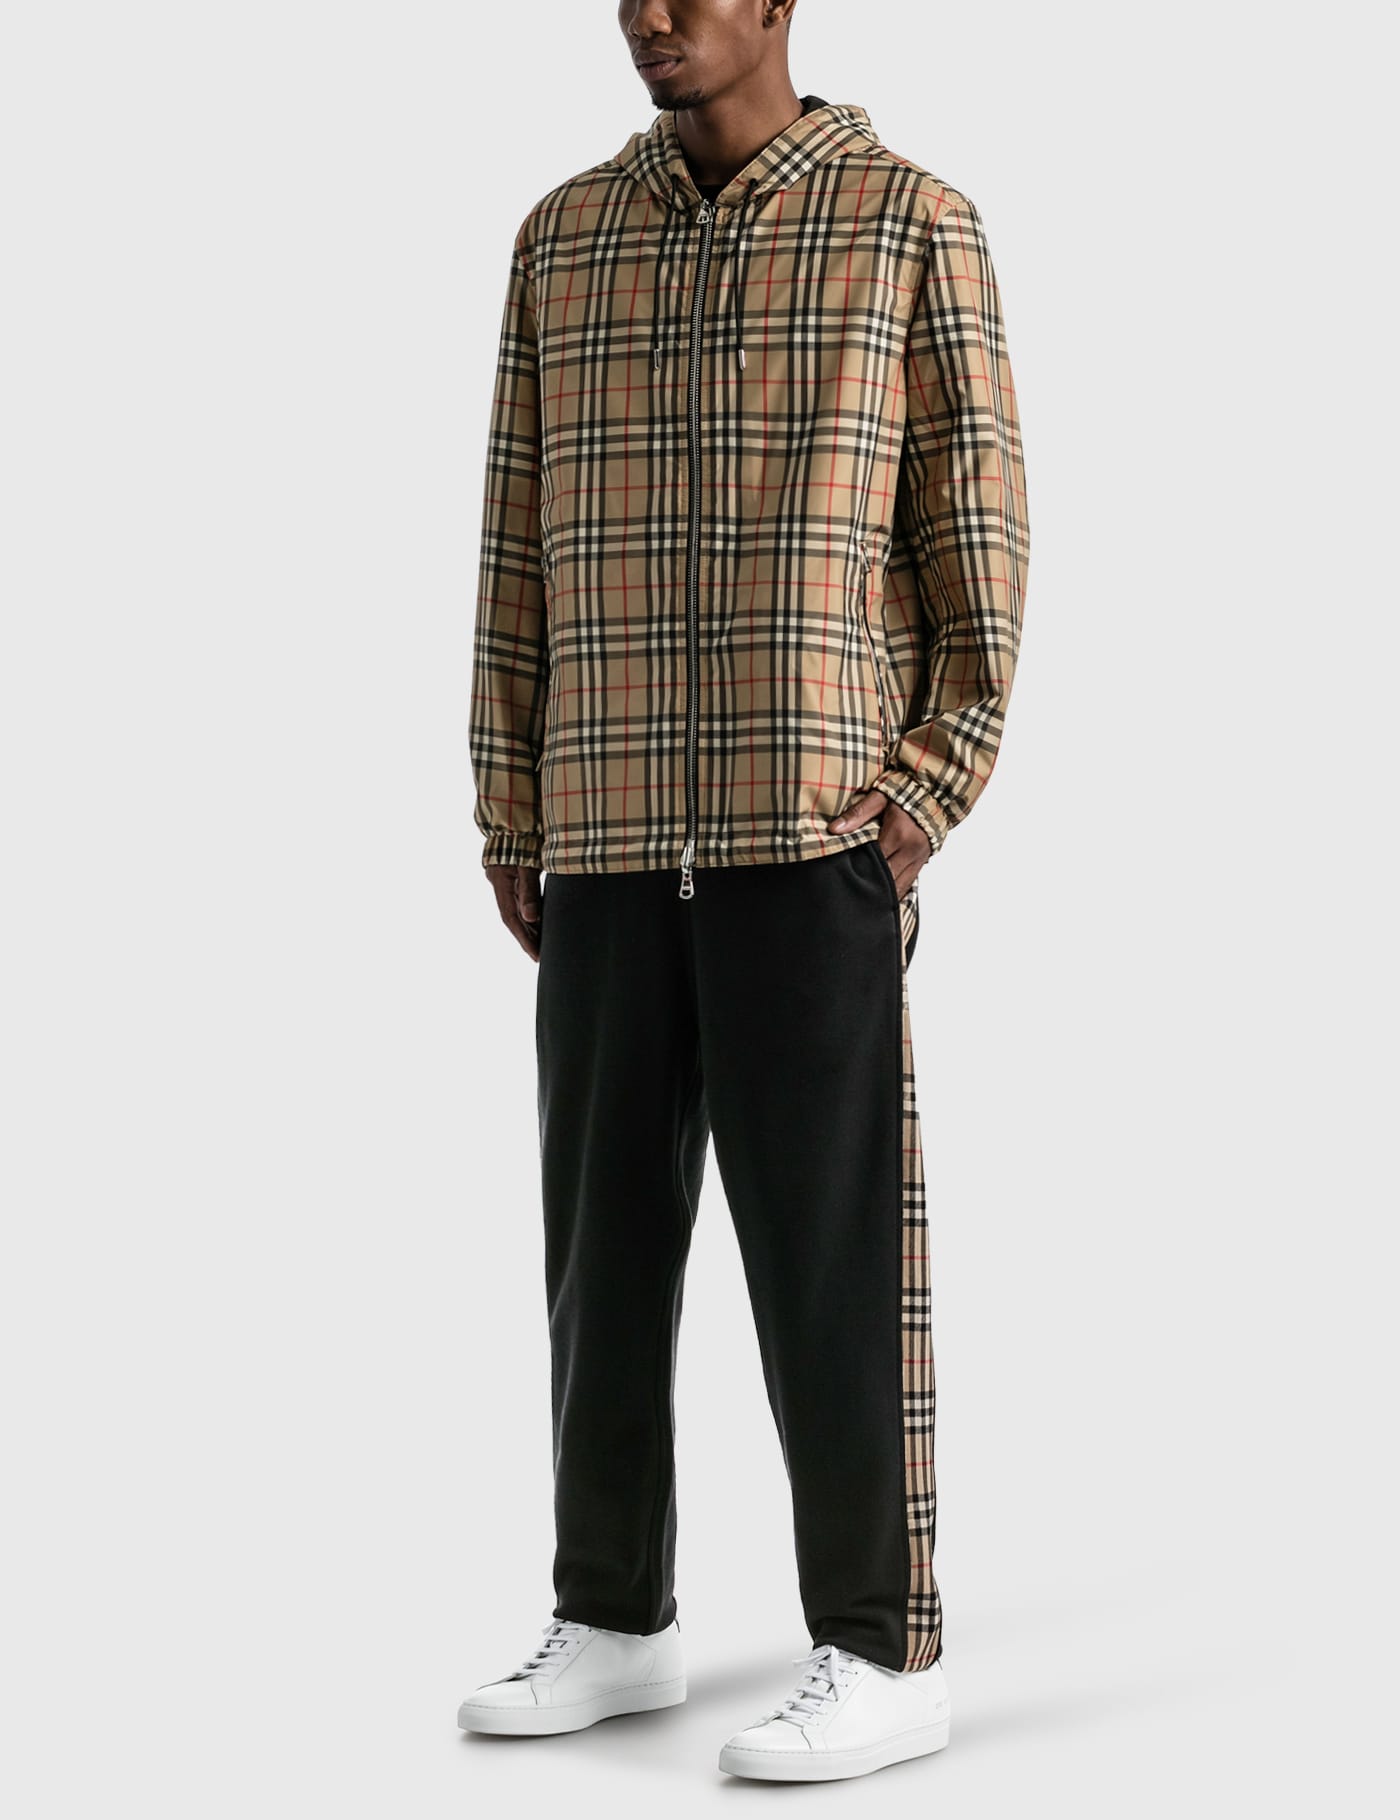 Burberry - Reversible Vintage Check Recycled Polyester Jacket | HBX -  Globally Curated Fashion and Lifestyle by Hypebeast